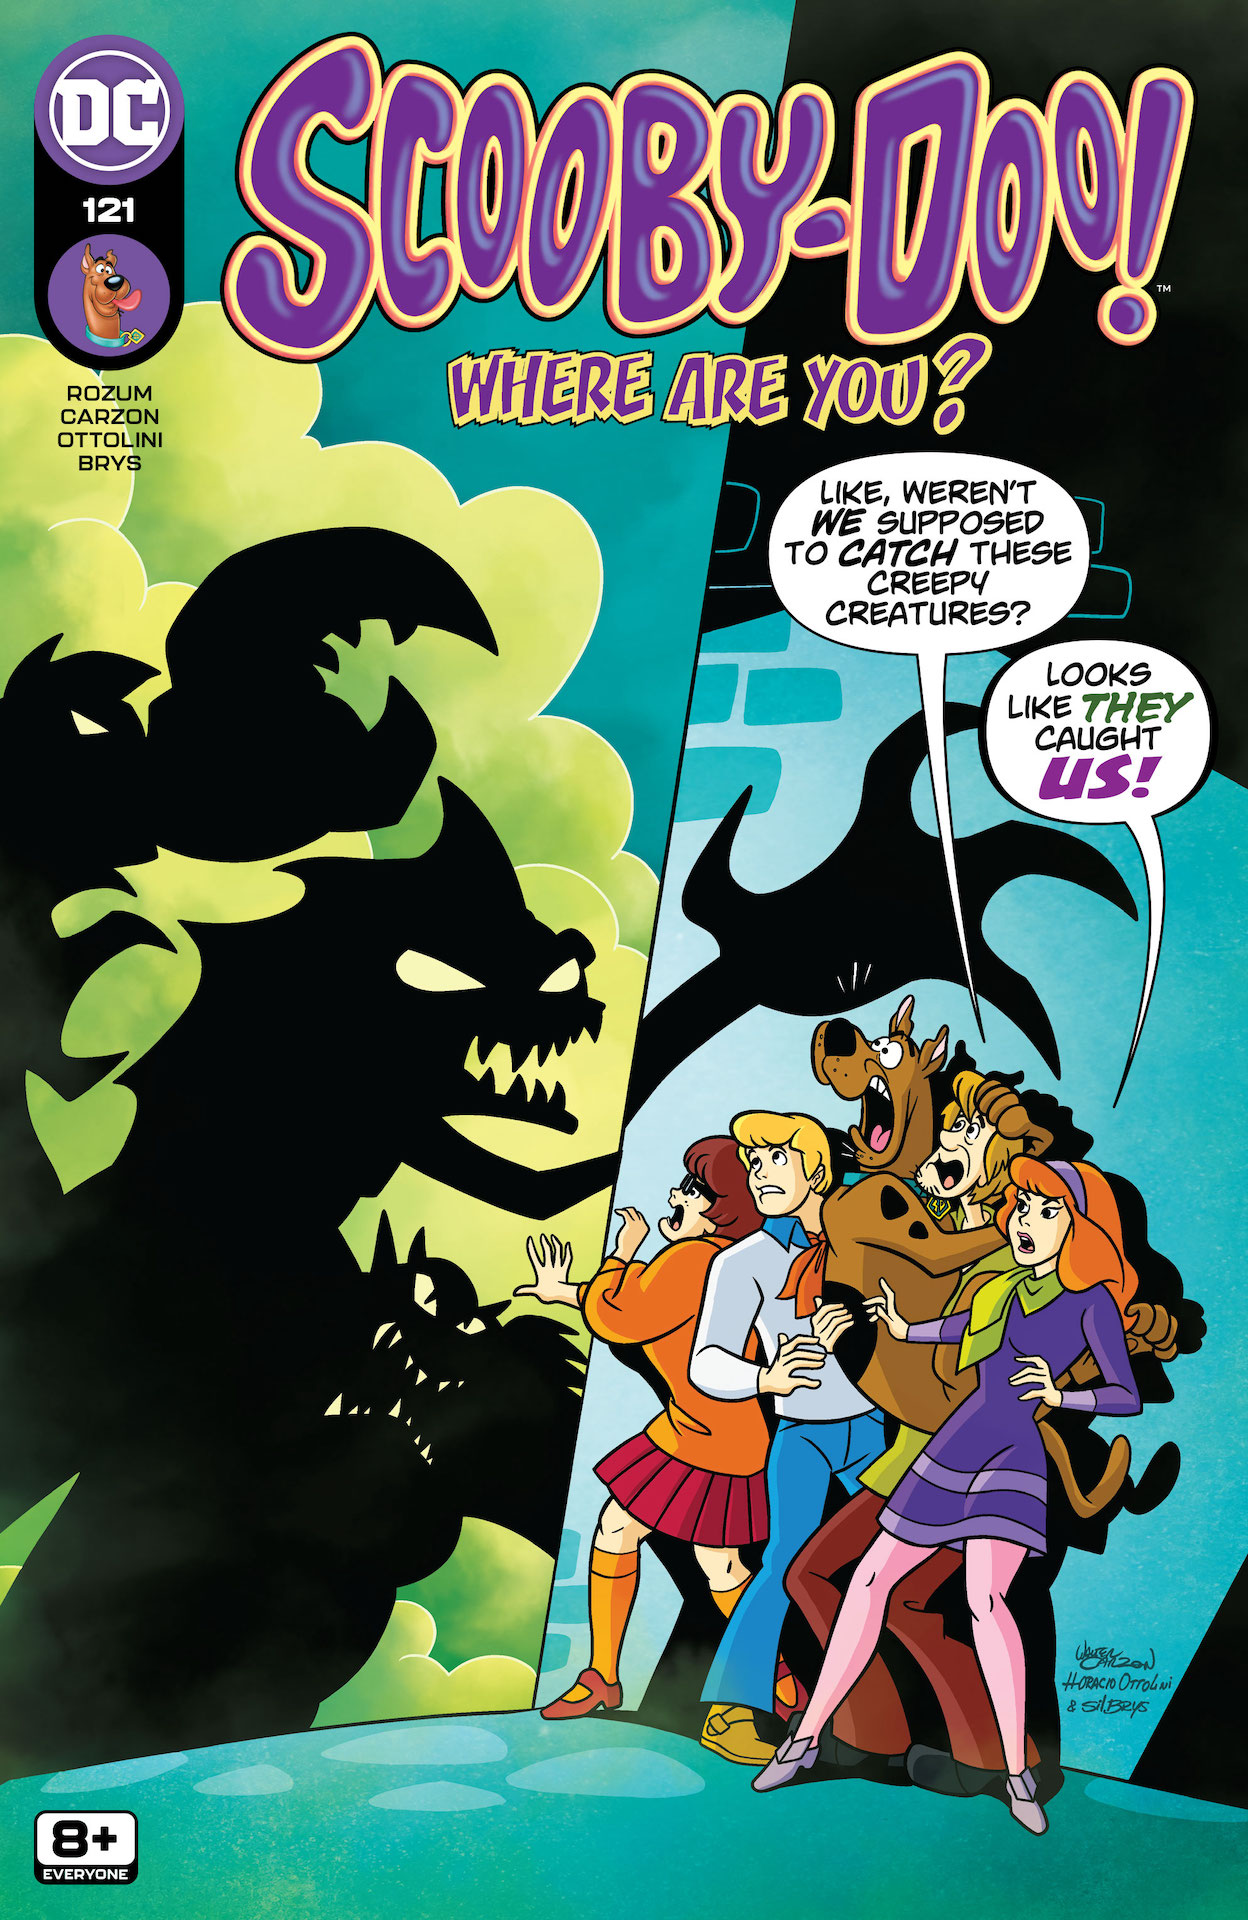 DC Preview: Scooby-Doo, Where Are You? #121